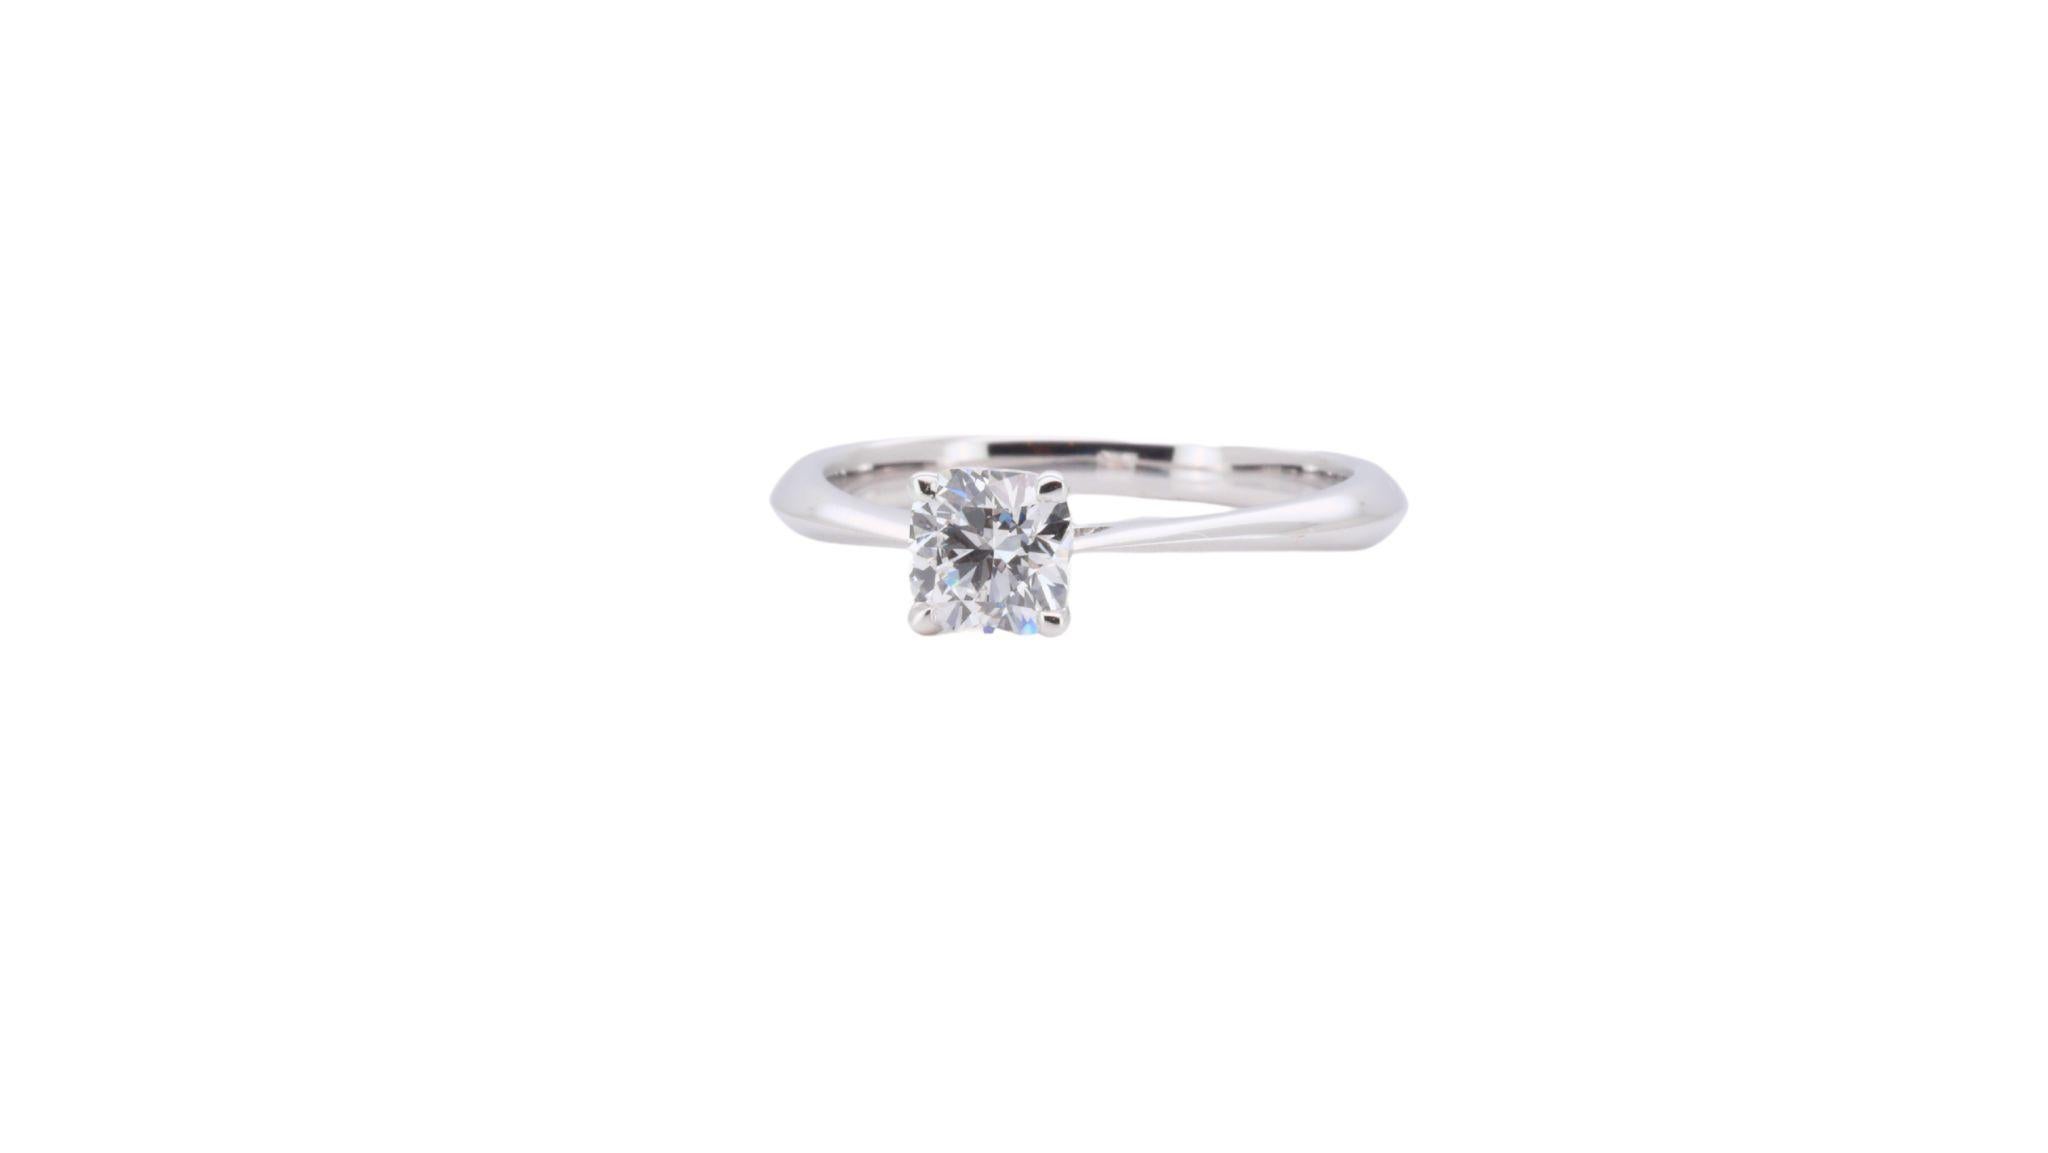 Cushion Cut Marvelous 18k White Gold Solitaire Ring w/ 0.47 Carat Natural Diamonds AGS Cert For Sale